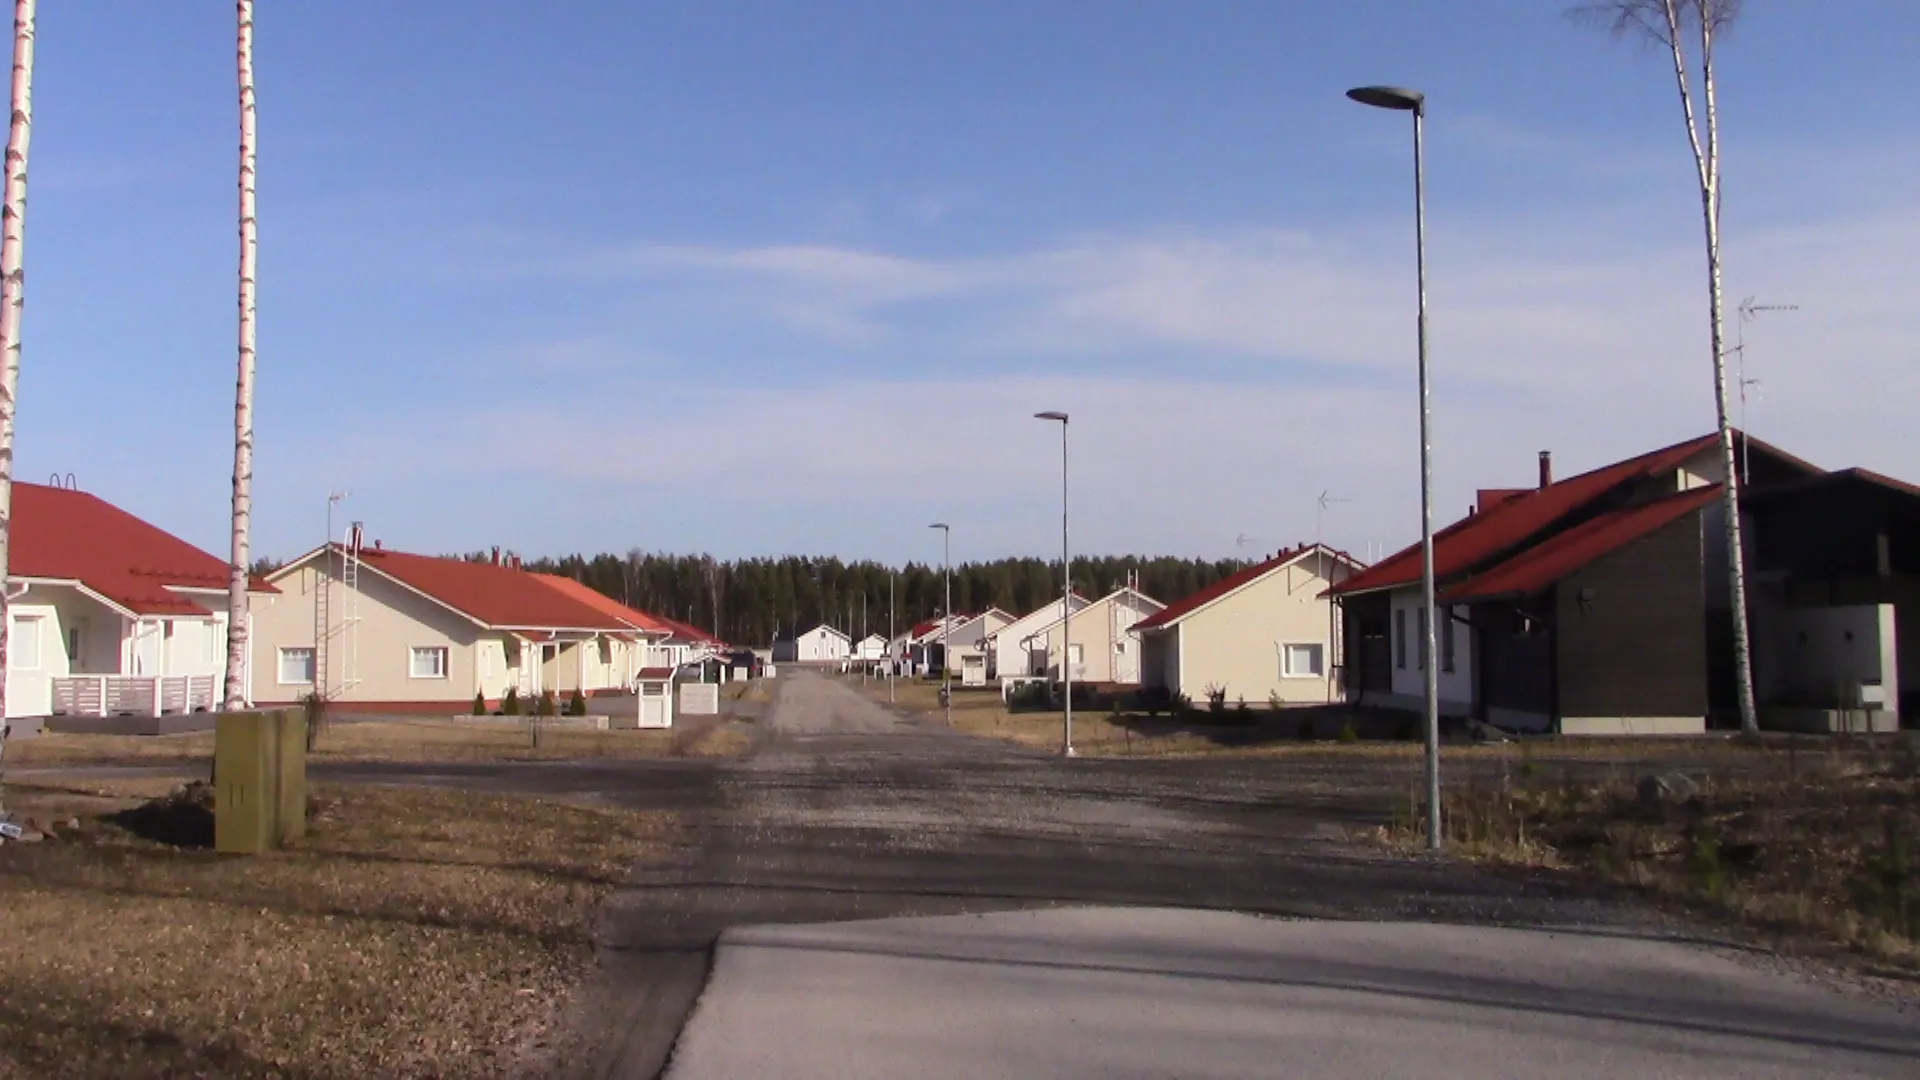 Photo showing: Newer area of Klasipruuki district at Kulotie road in Pori, Finland.